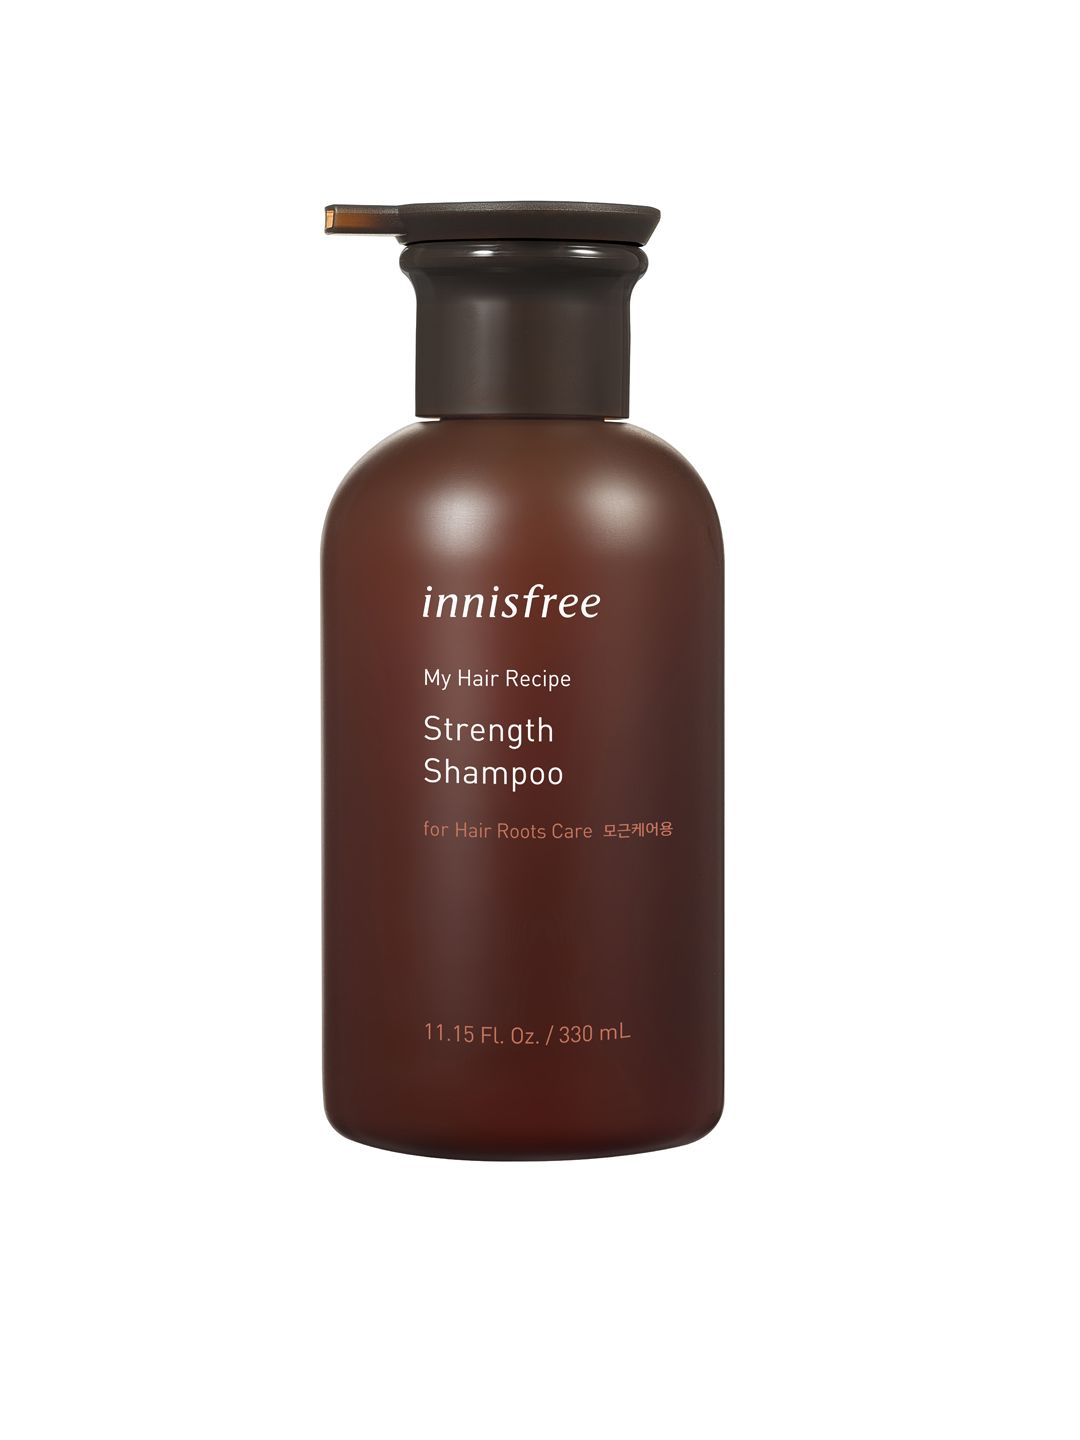 Innisfree My Hair Recipe Strength Shampoo for Hair Roots Care - 330 ml Price in India